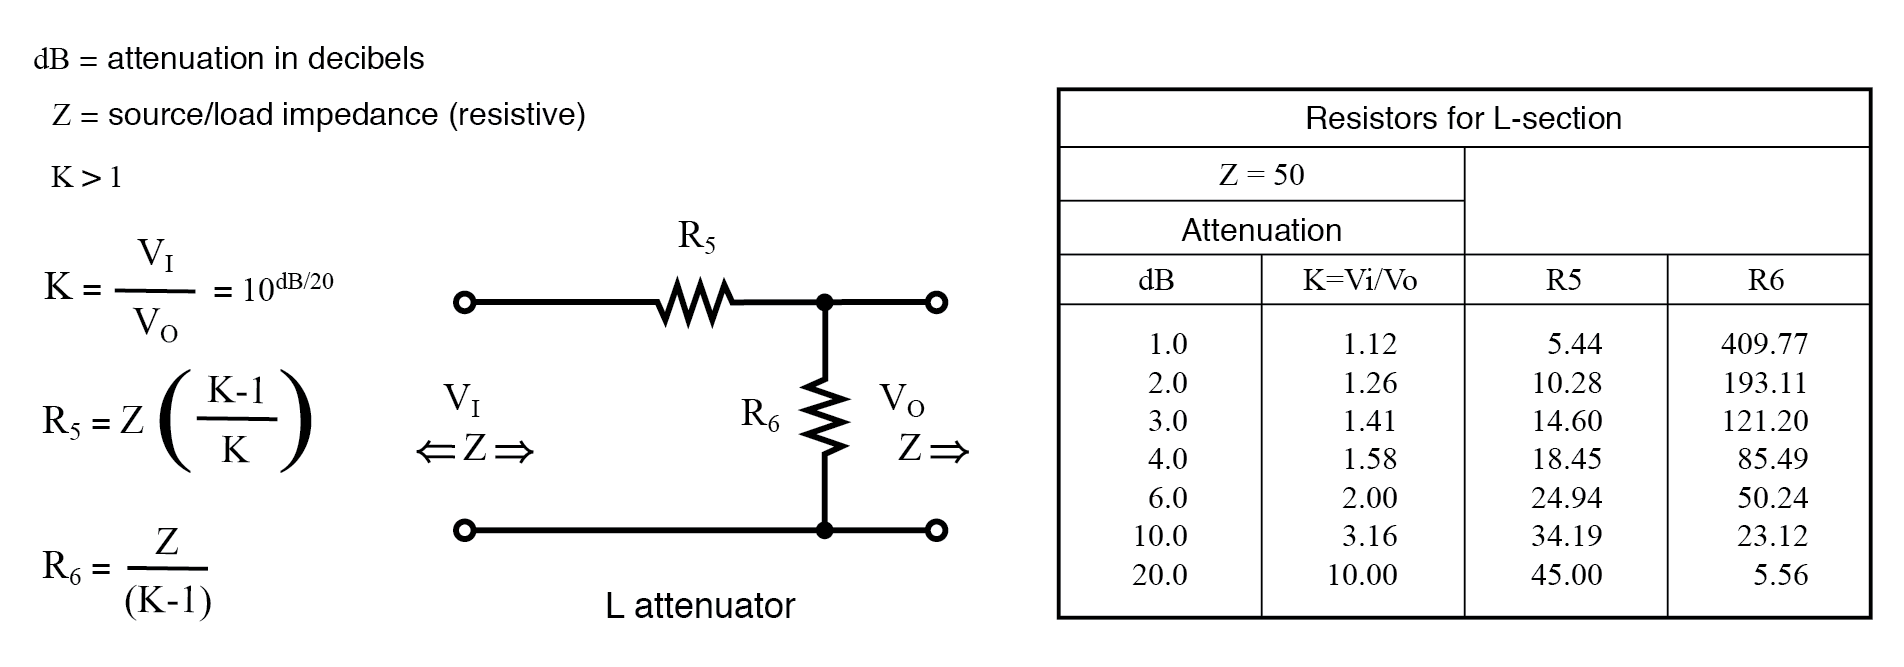 L-section attenuator table for 50 Ω source and load impedance.